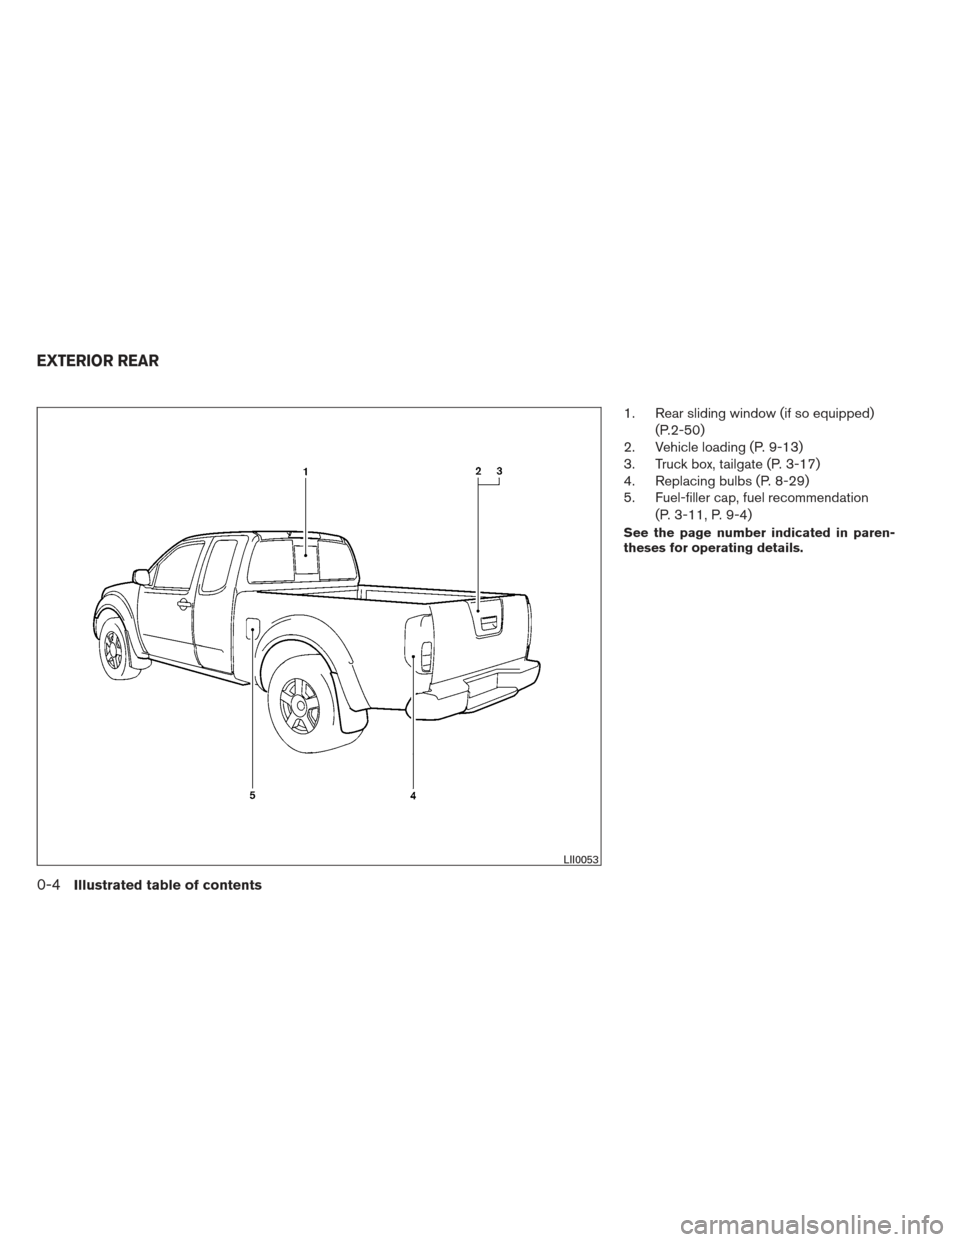 NISSAN FRONTIER 2013 D40 / 2.G User Guide 1. Rear sliding window (if so equipped)(P.2-50)
2. Vehicle loading (P. 9-13)
3. Truck box, tailgate (P. 3-17)
4. Replacing bulbs (P. 8-29)
5. Fuel-filler cap, fuel recommendation
(P. 3-11, P. 9-4)
See